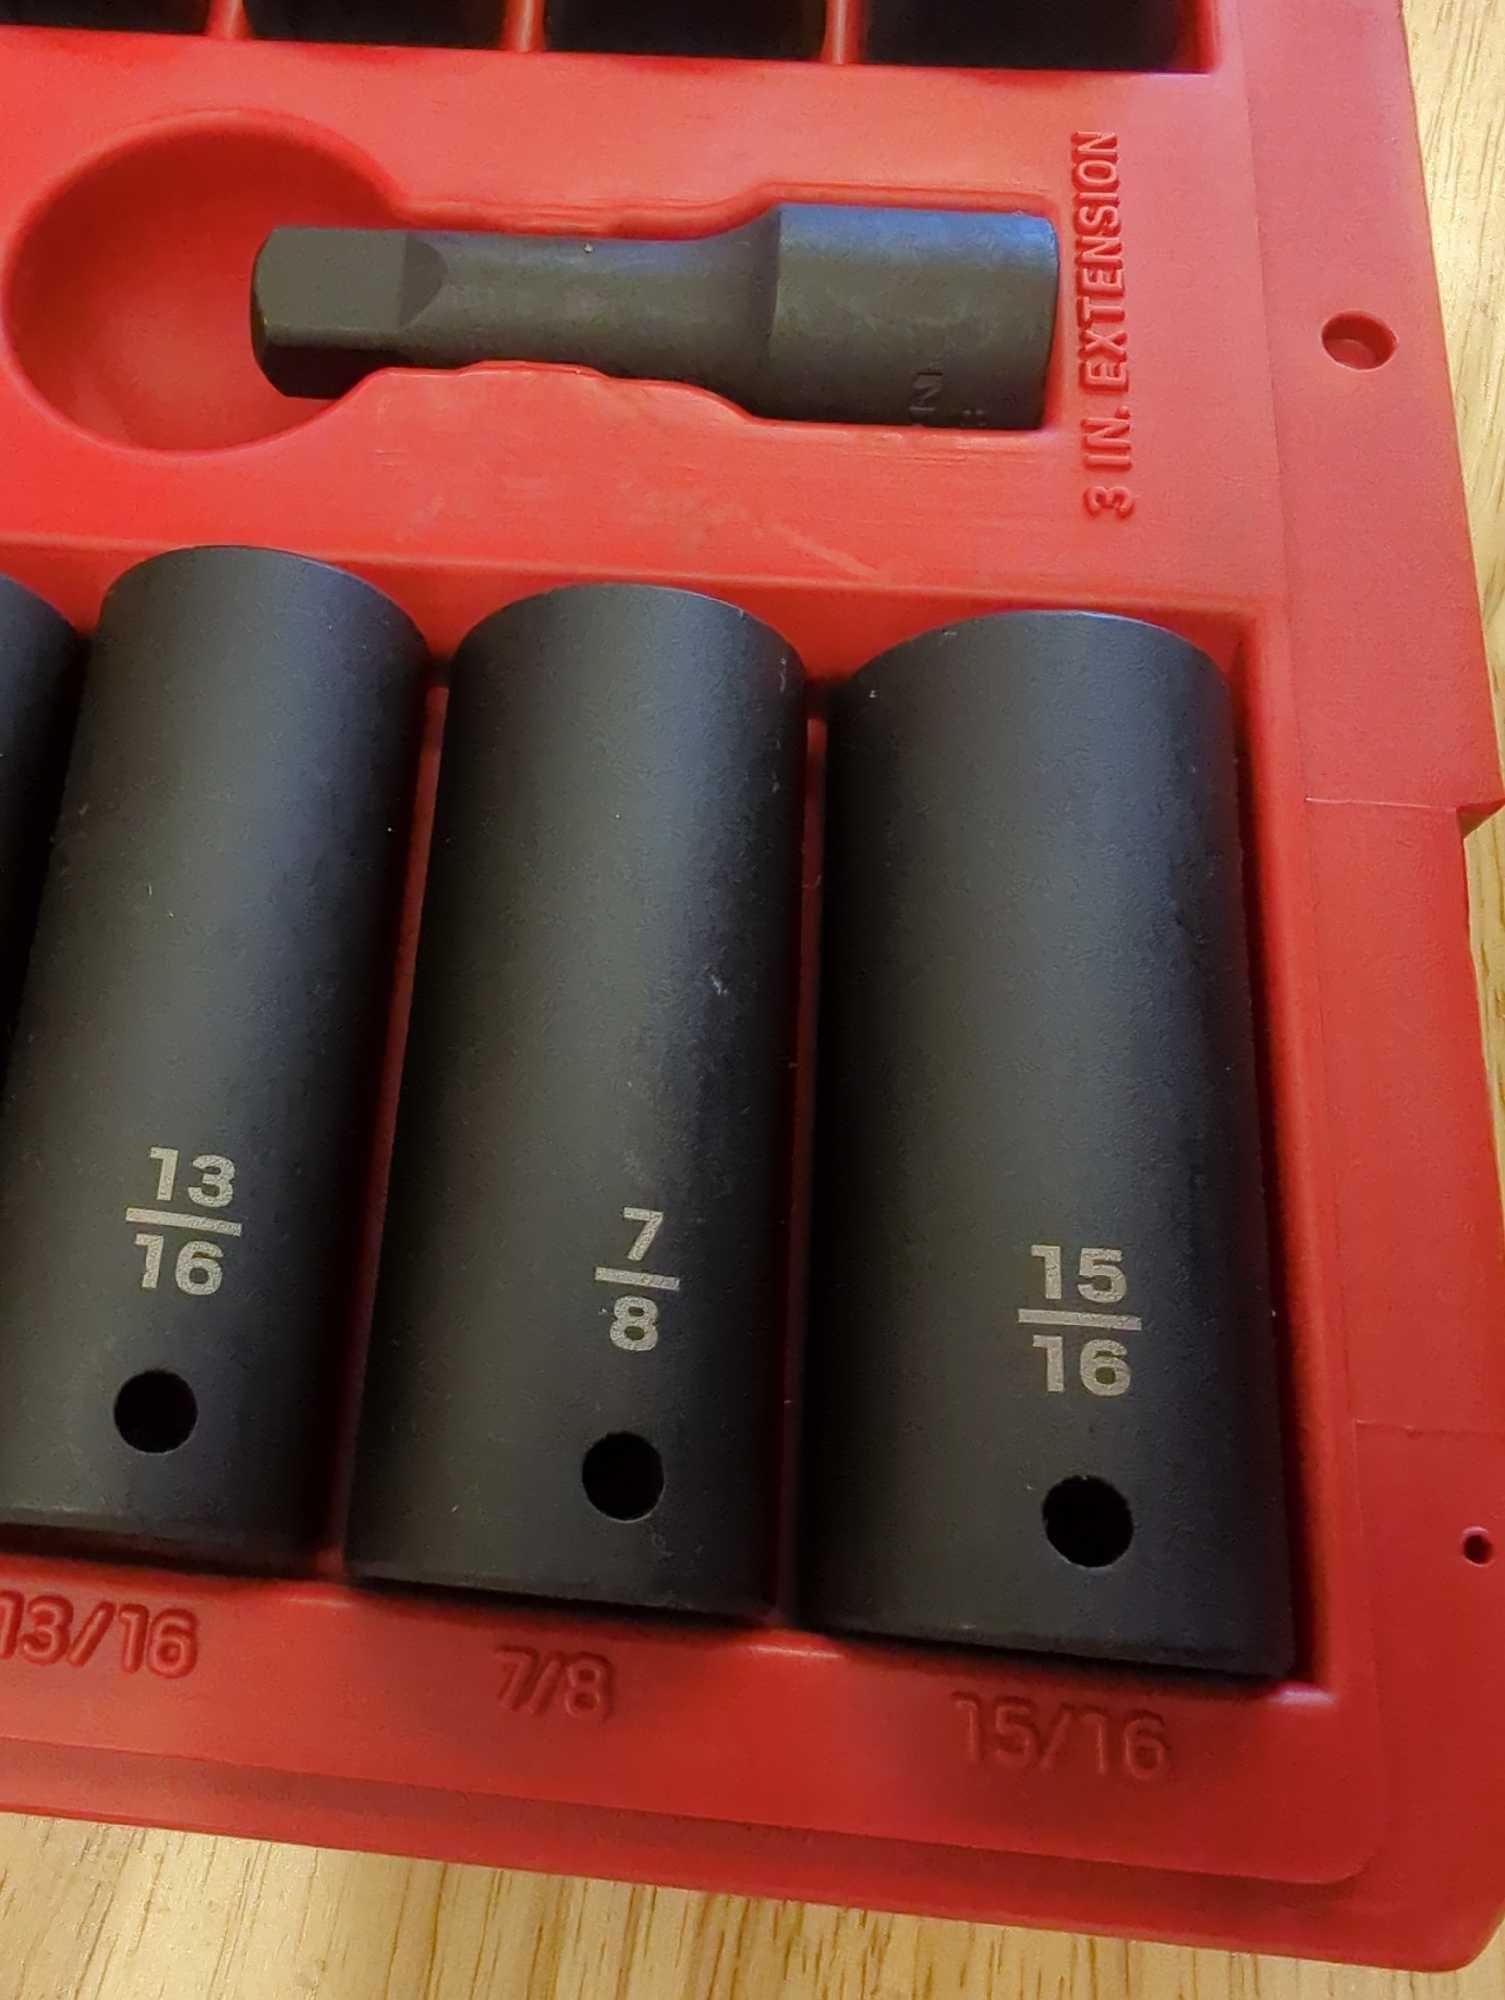 TEKTON 1/2 in. Drive Impact Lug Nut Socket Set (9-Piece), Appears to be New Retail Price Value $50